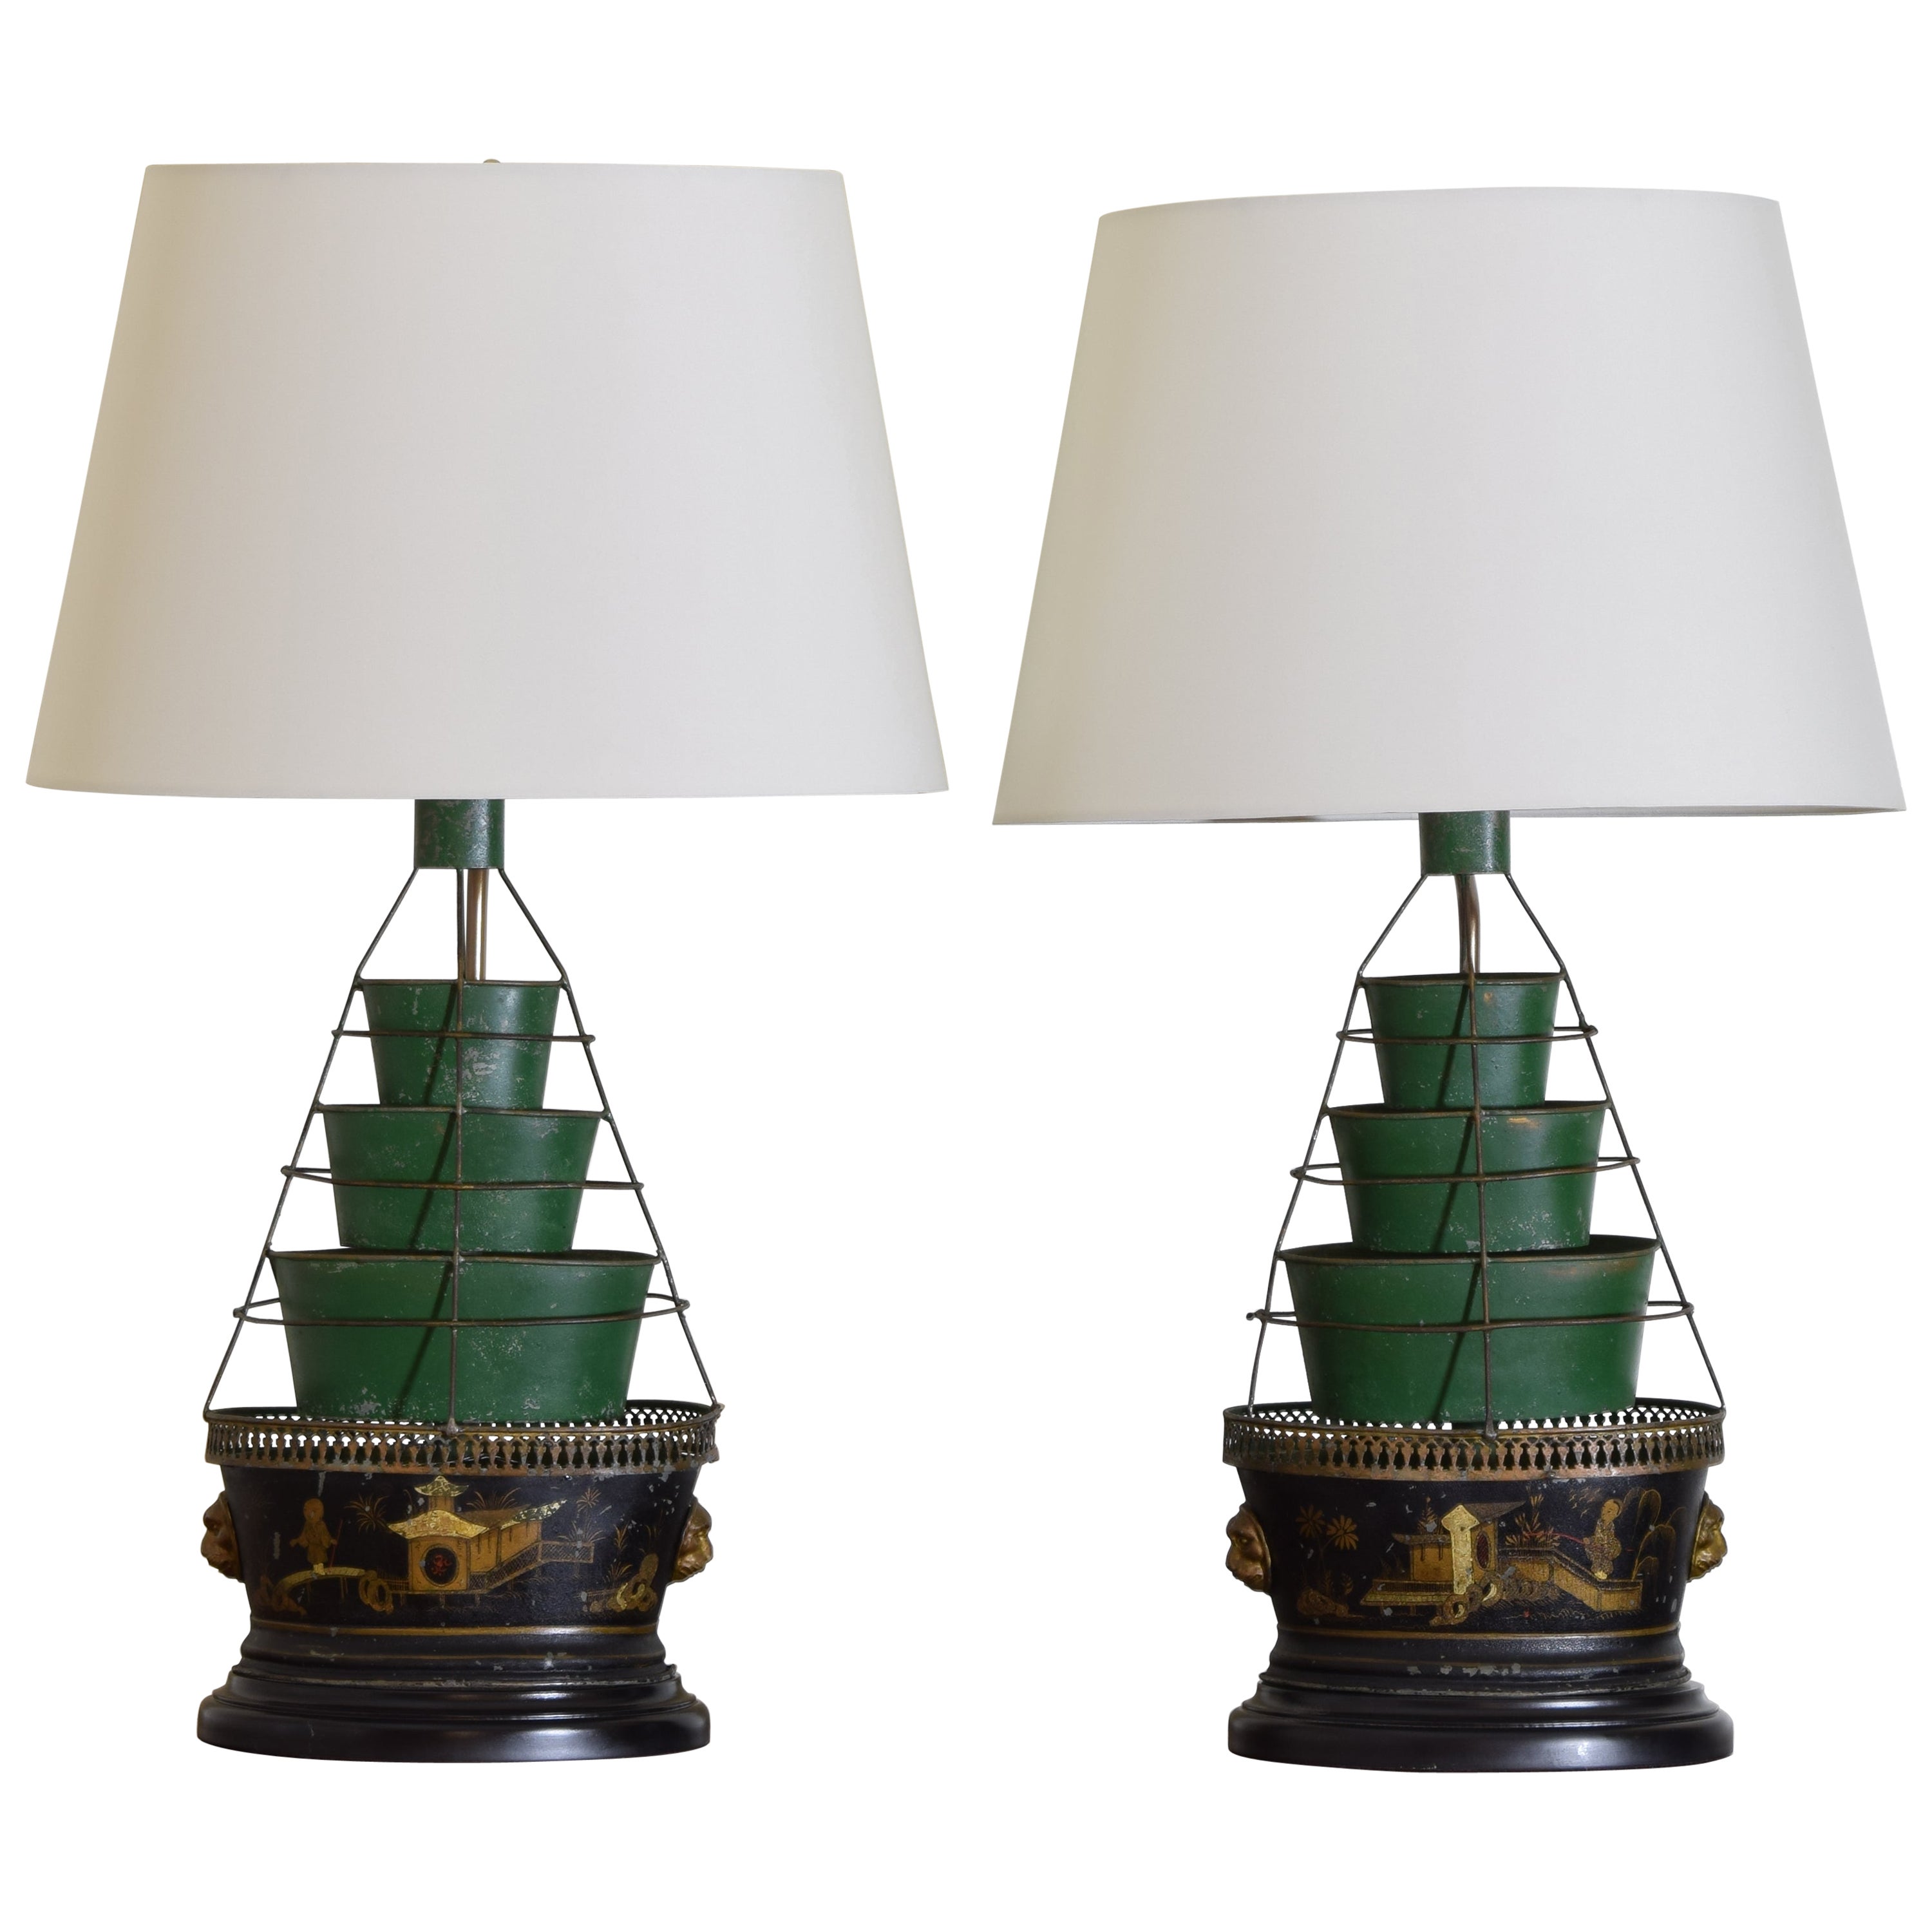 Pair of Tole Chinoiserie Tulip Jardinieres Mounted as Table Lamps, early 20thc For Sale